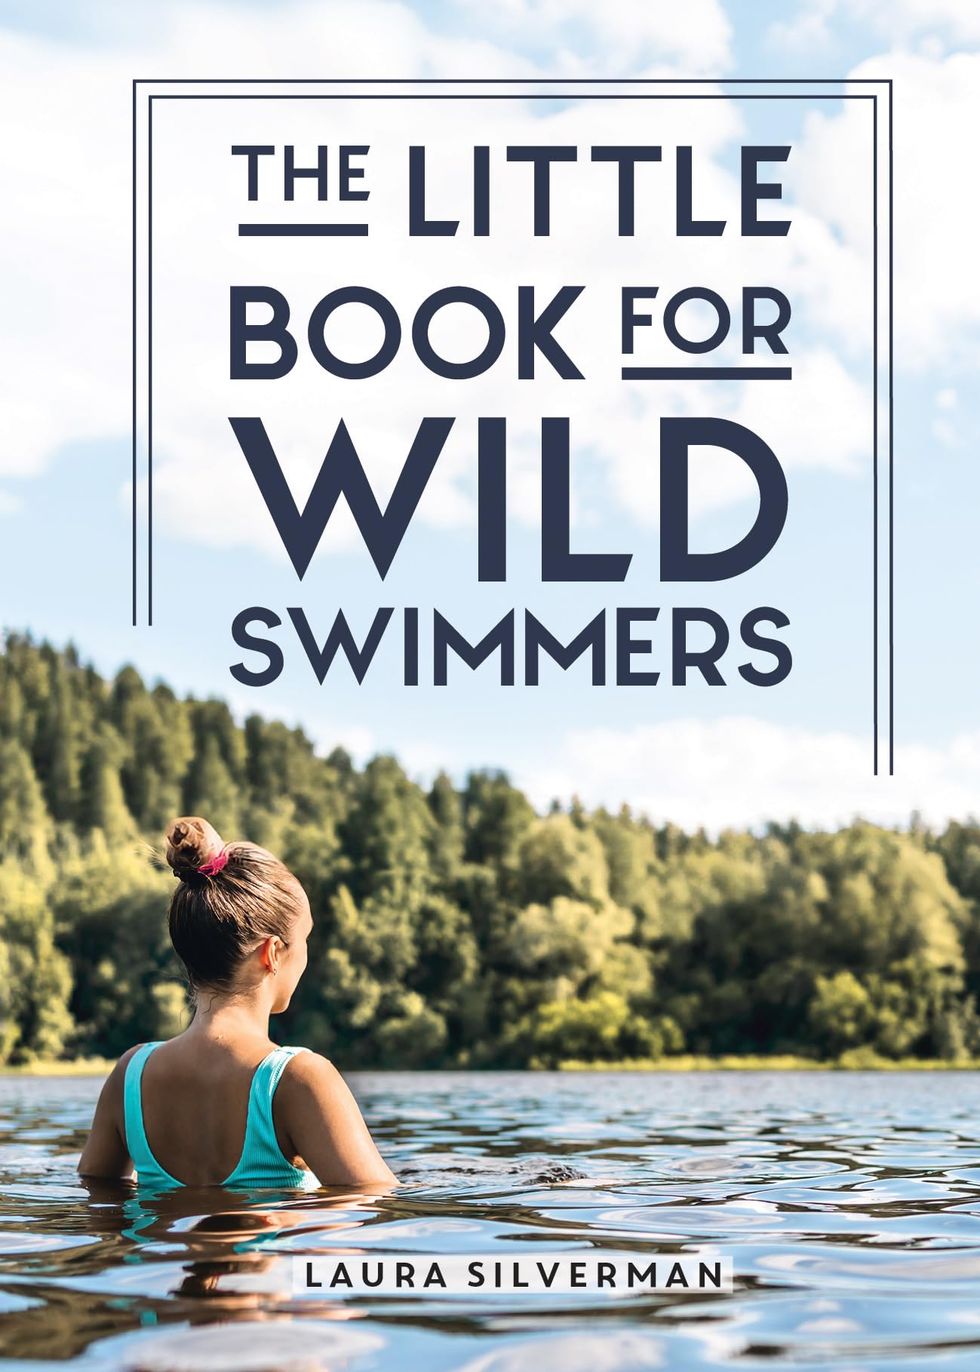 The Little Book for Wild Swimmers by Laura Silverman